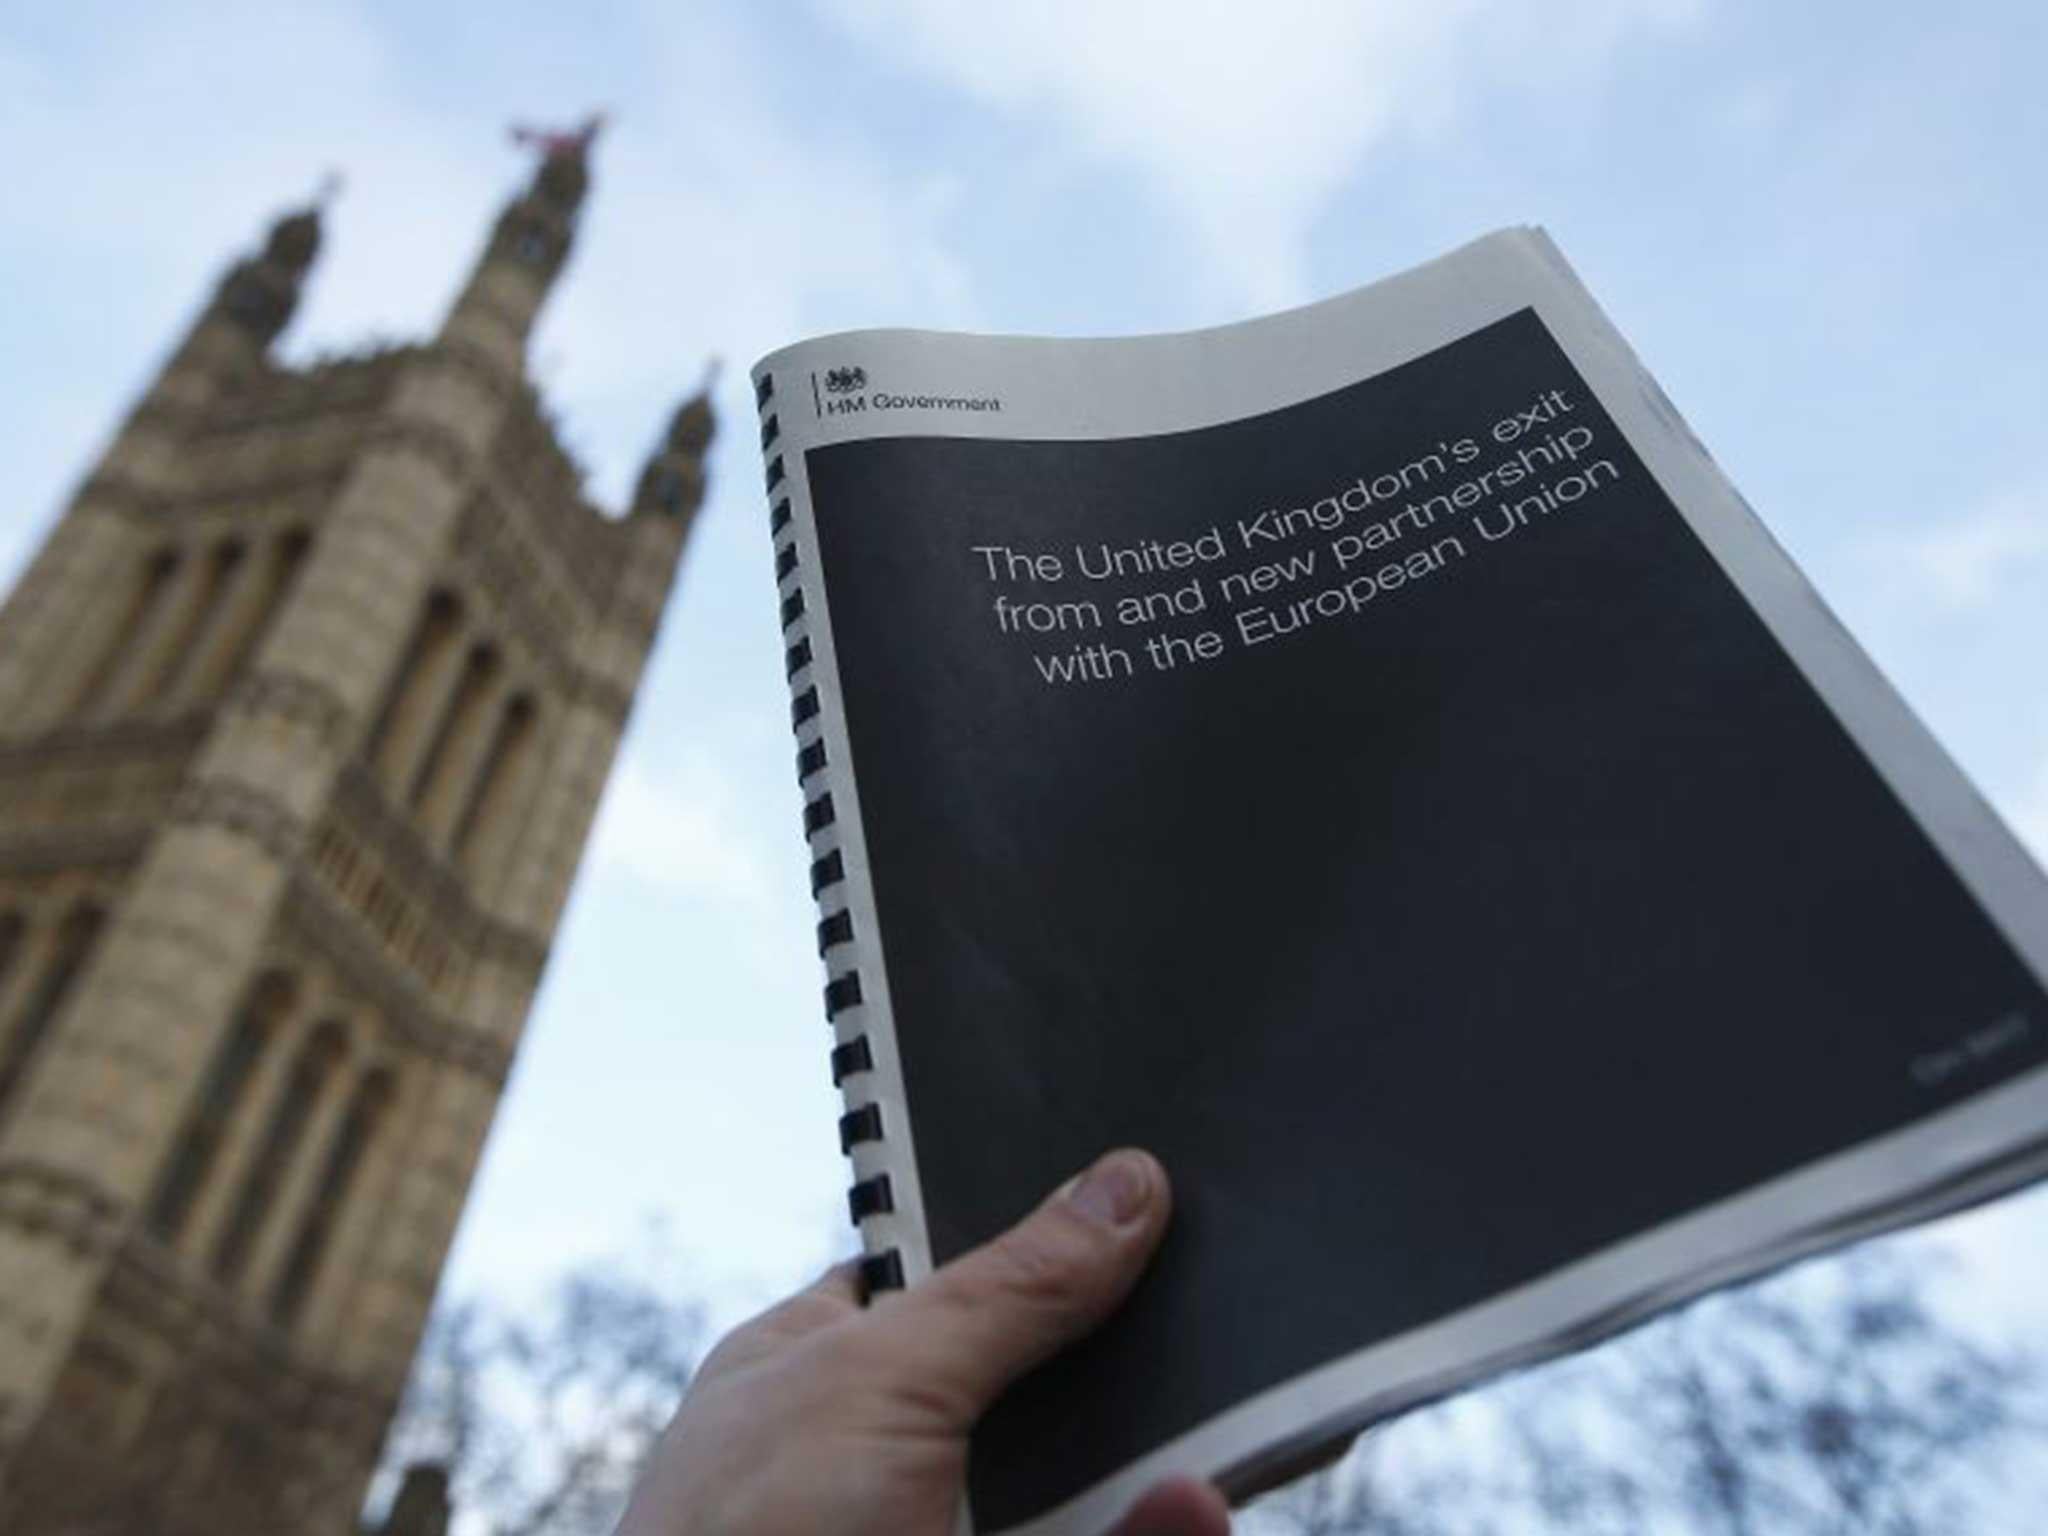 The White Paper aims to set out the Government’s plans for leaving the EU